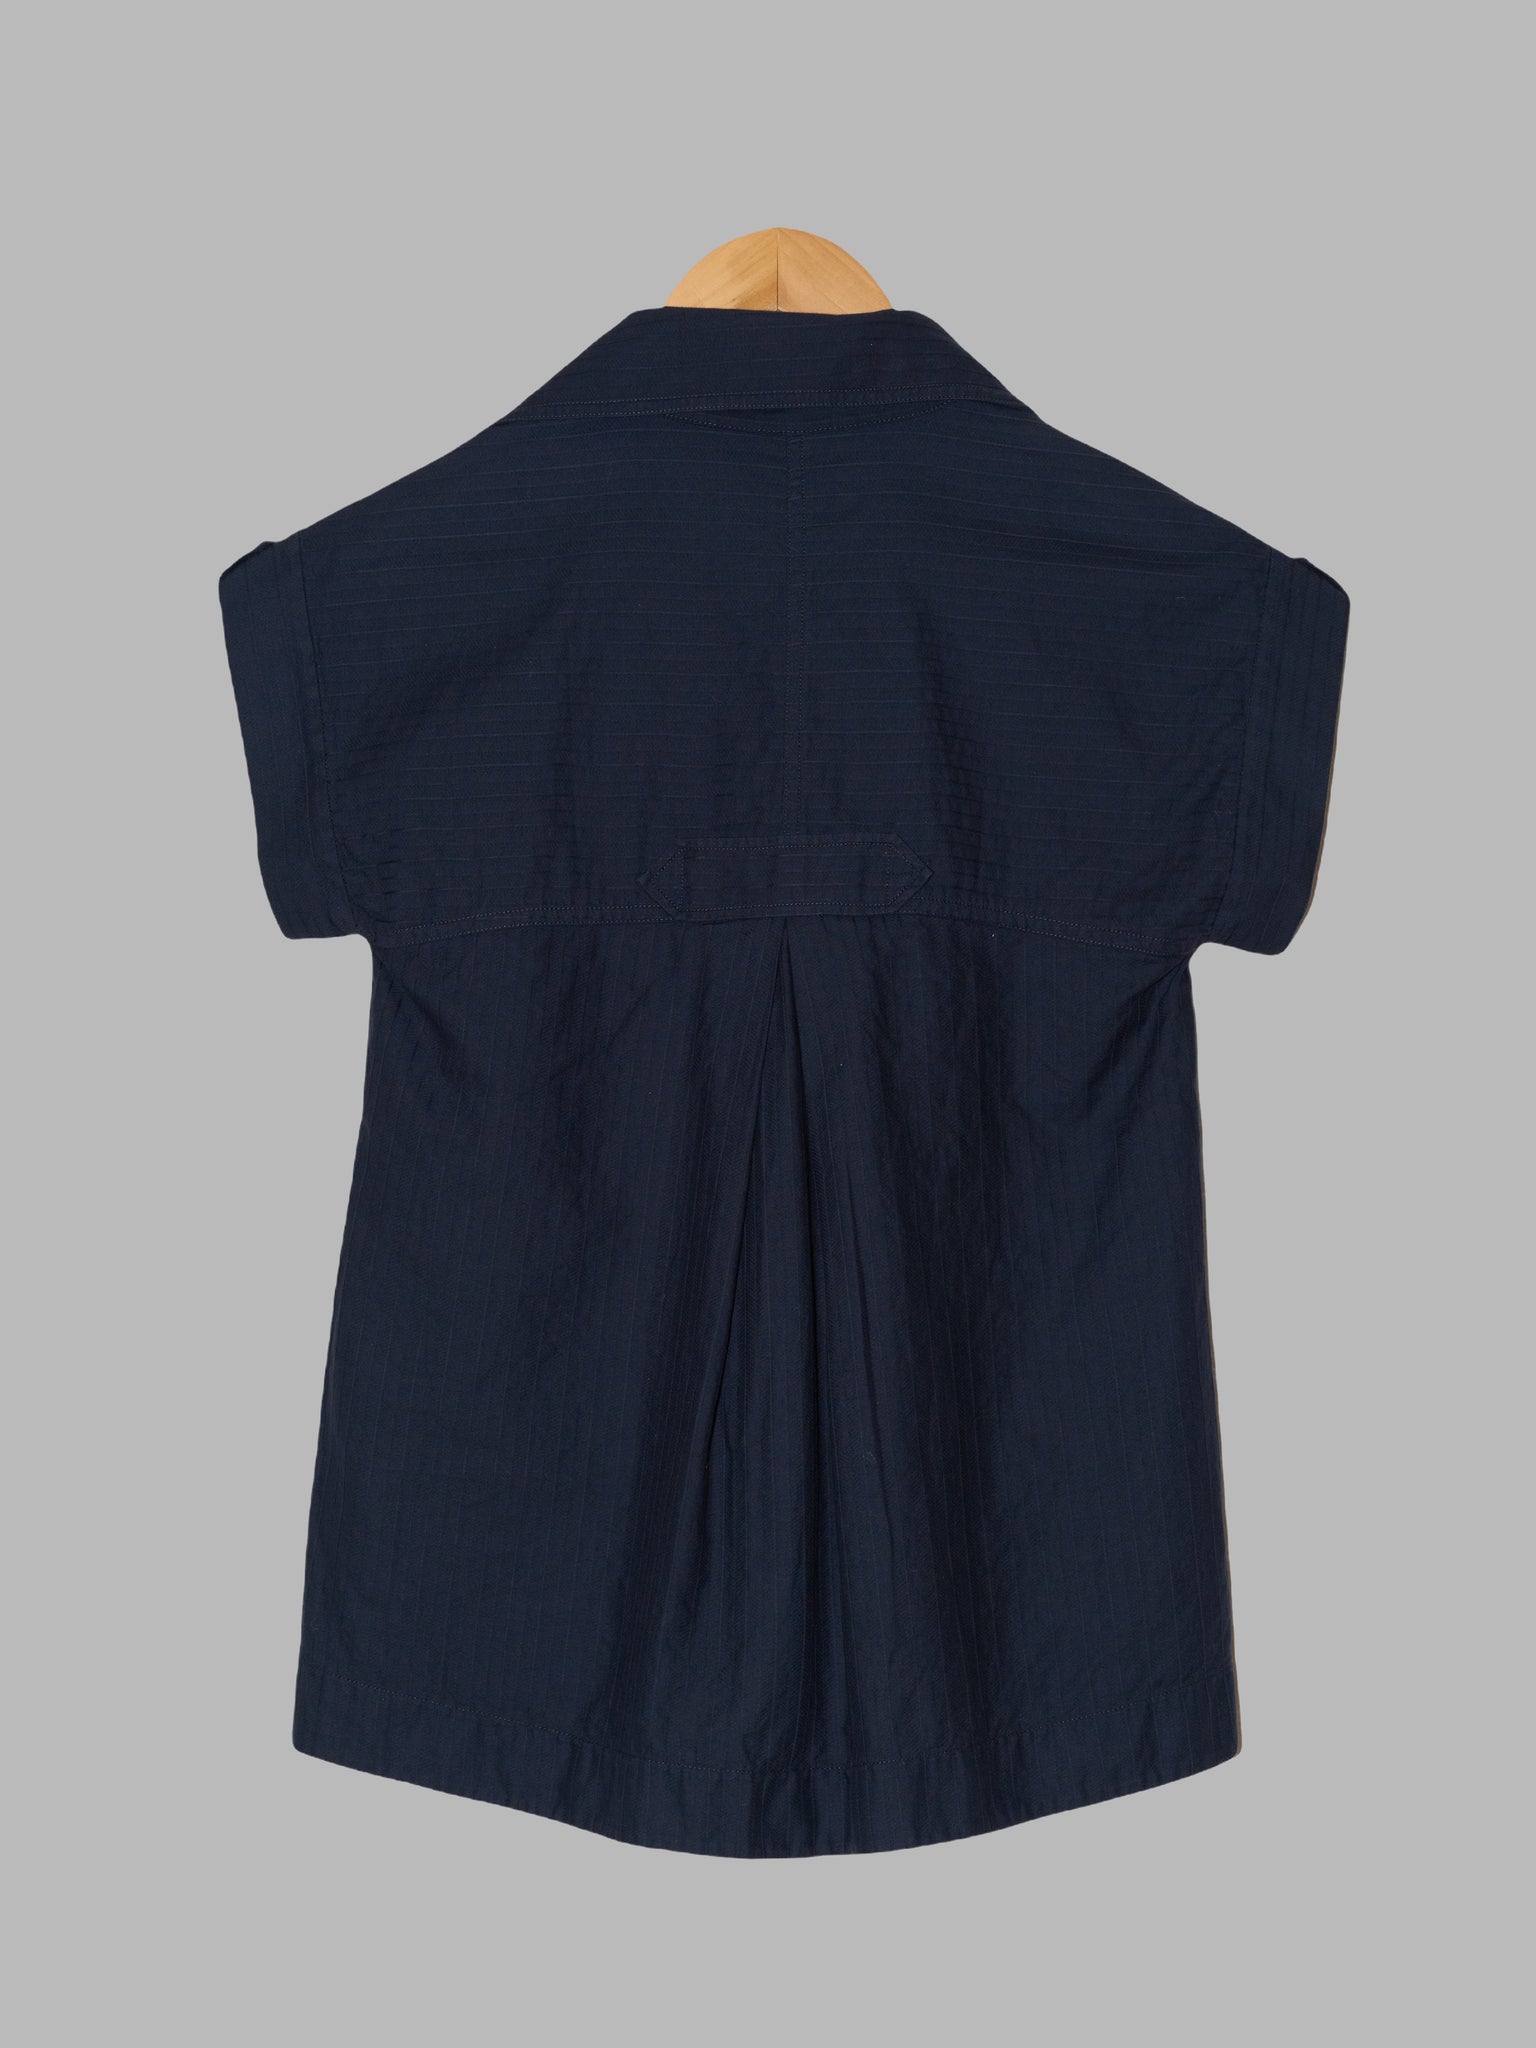 Kenzo Jeans dark navy cotton short sleeve pullover blouse - size 36 S